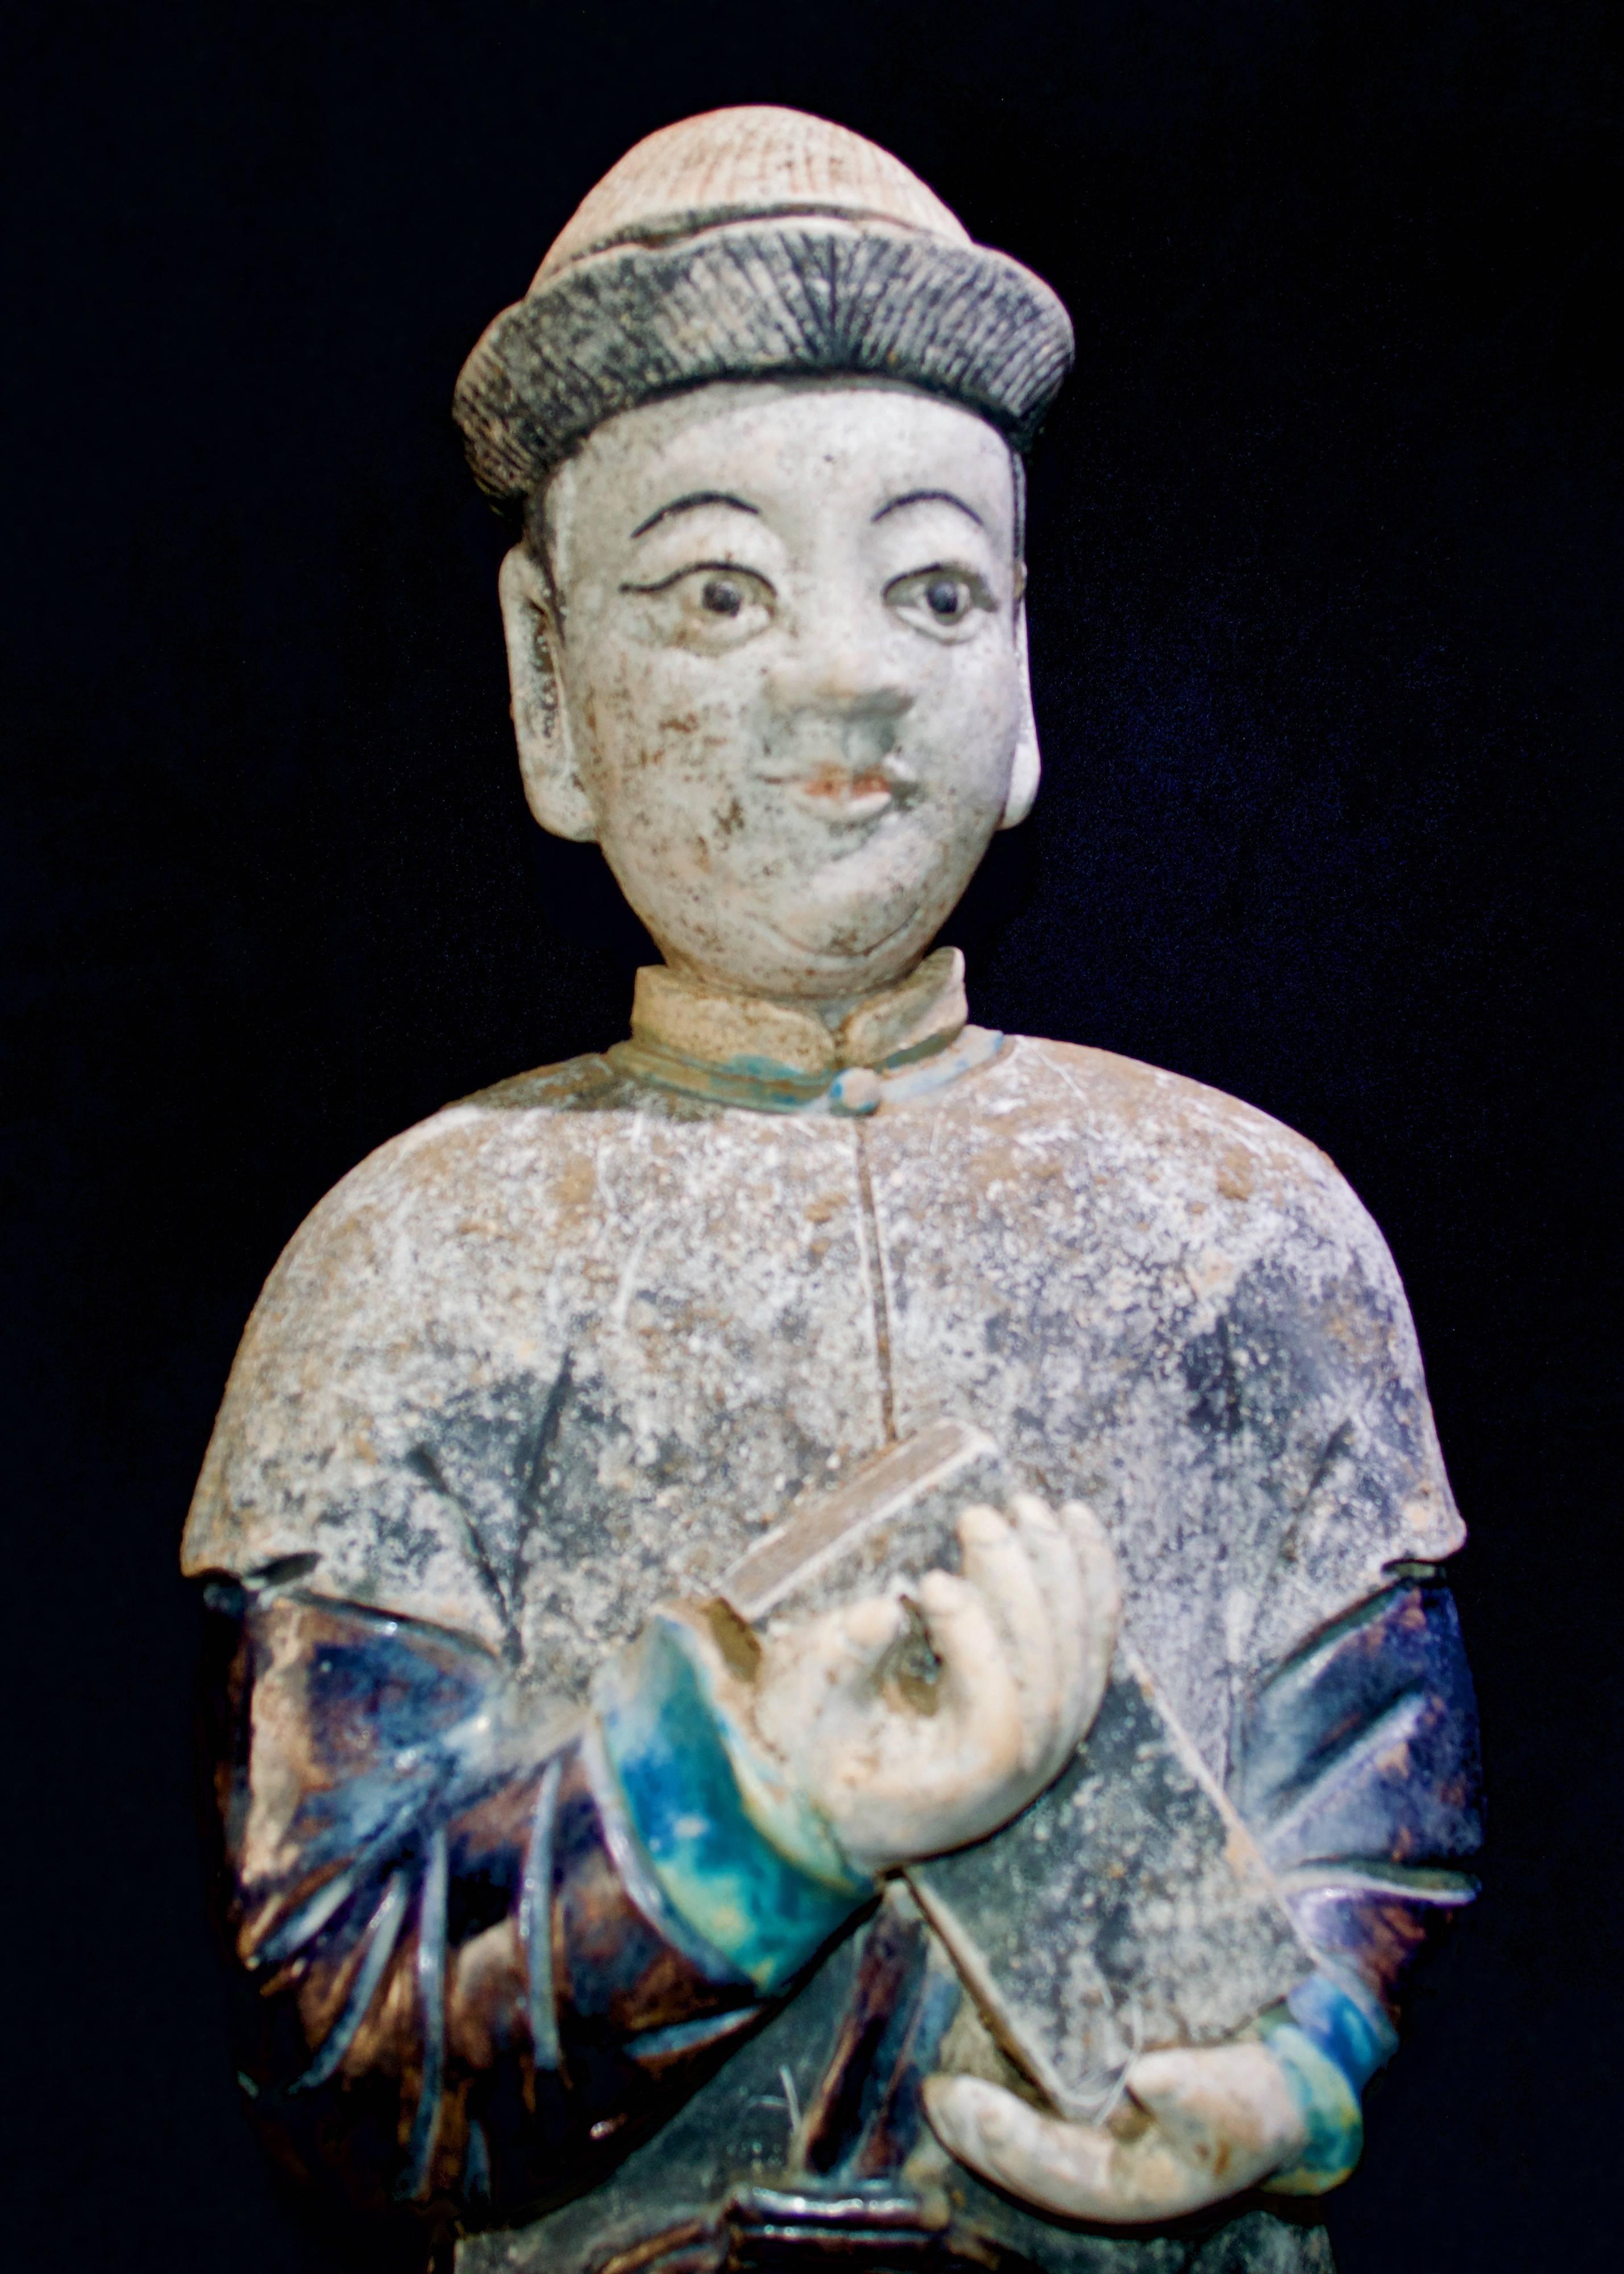 A magnificent male courtier from the Ming dynasty, 1368-1644 AD, in excellent condition. At 82 cm tall, this immense figure is wearing a traditional hanfu shades of blue and black. It is standing on a rectangular black & blue plinth and the unglazed